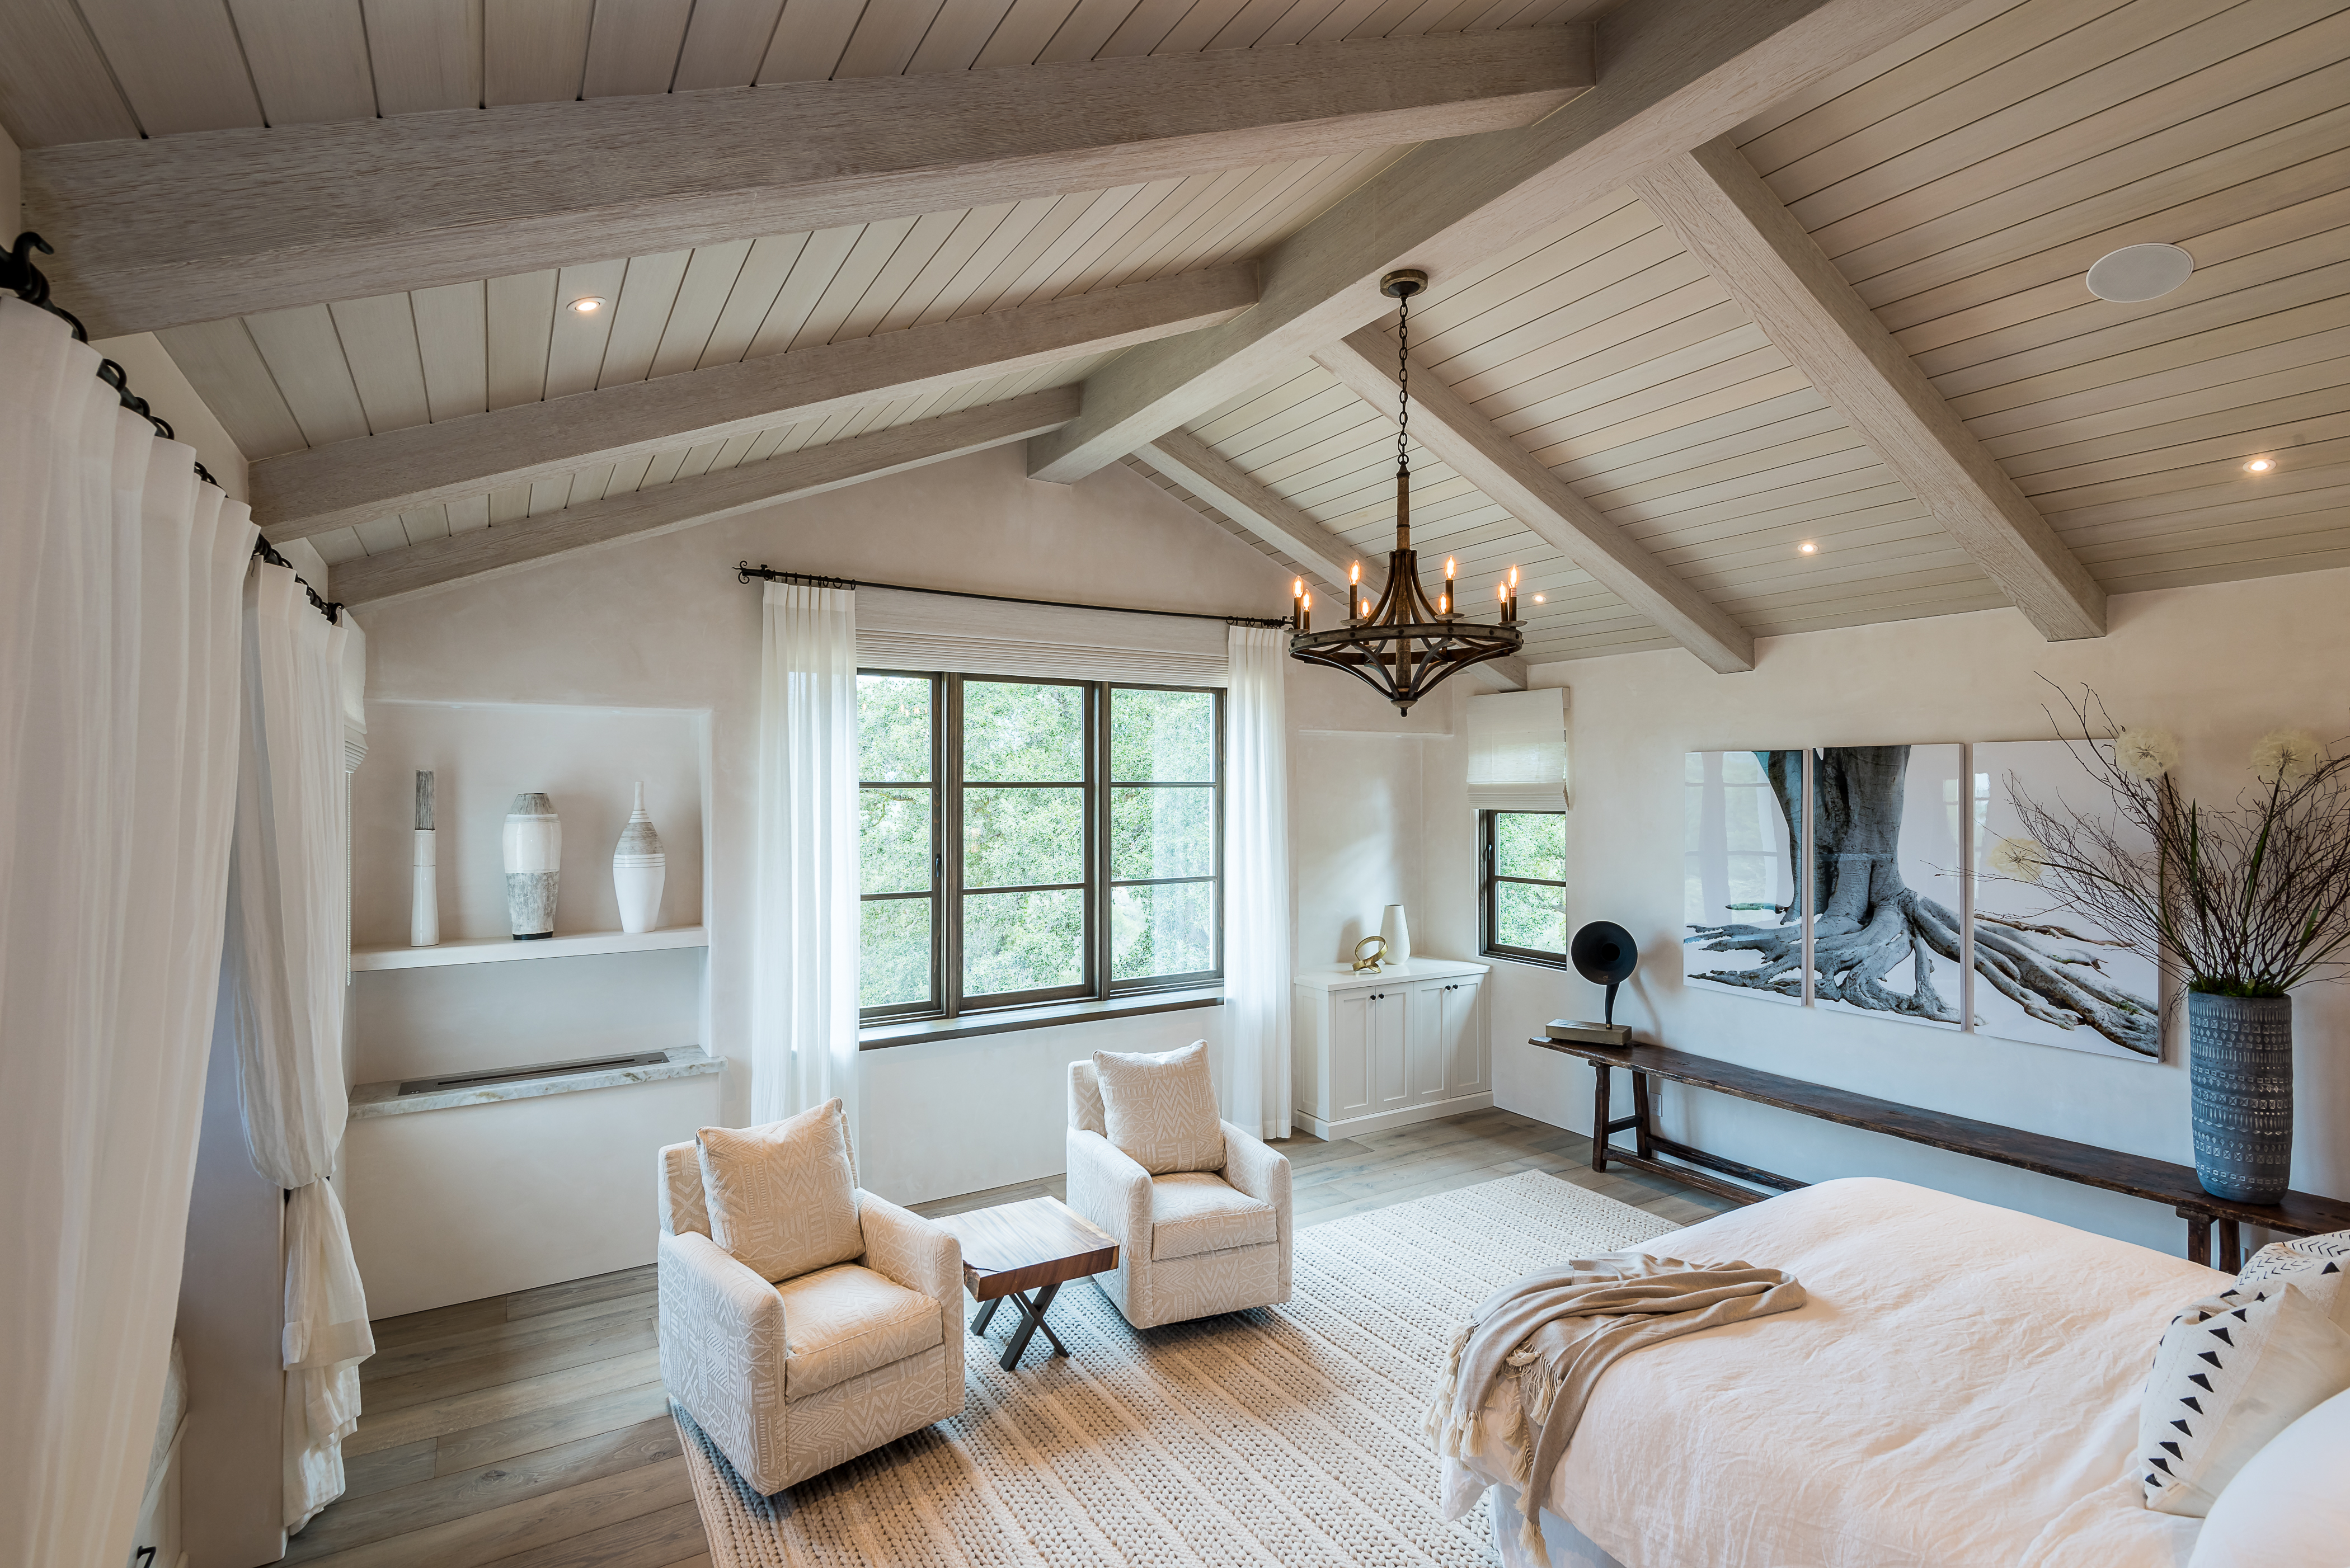 Light and bright vaulted ceiling beams in a farmhouse-inspired bedroom